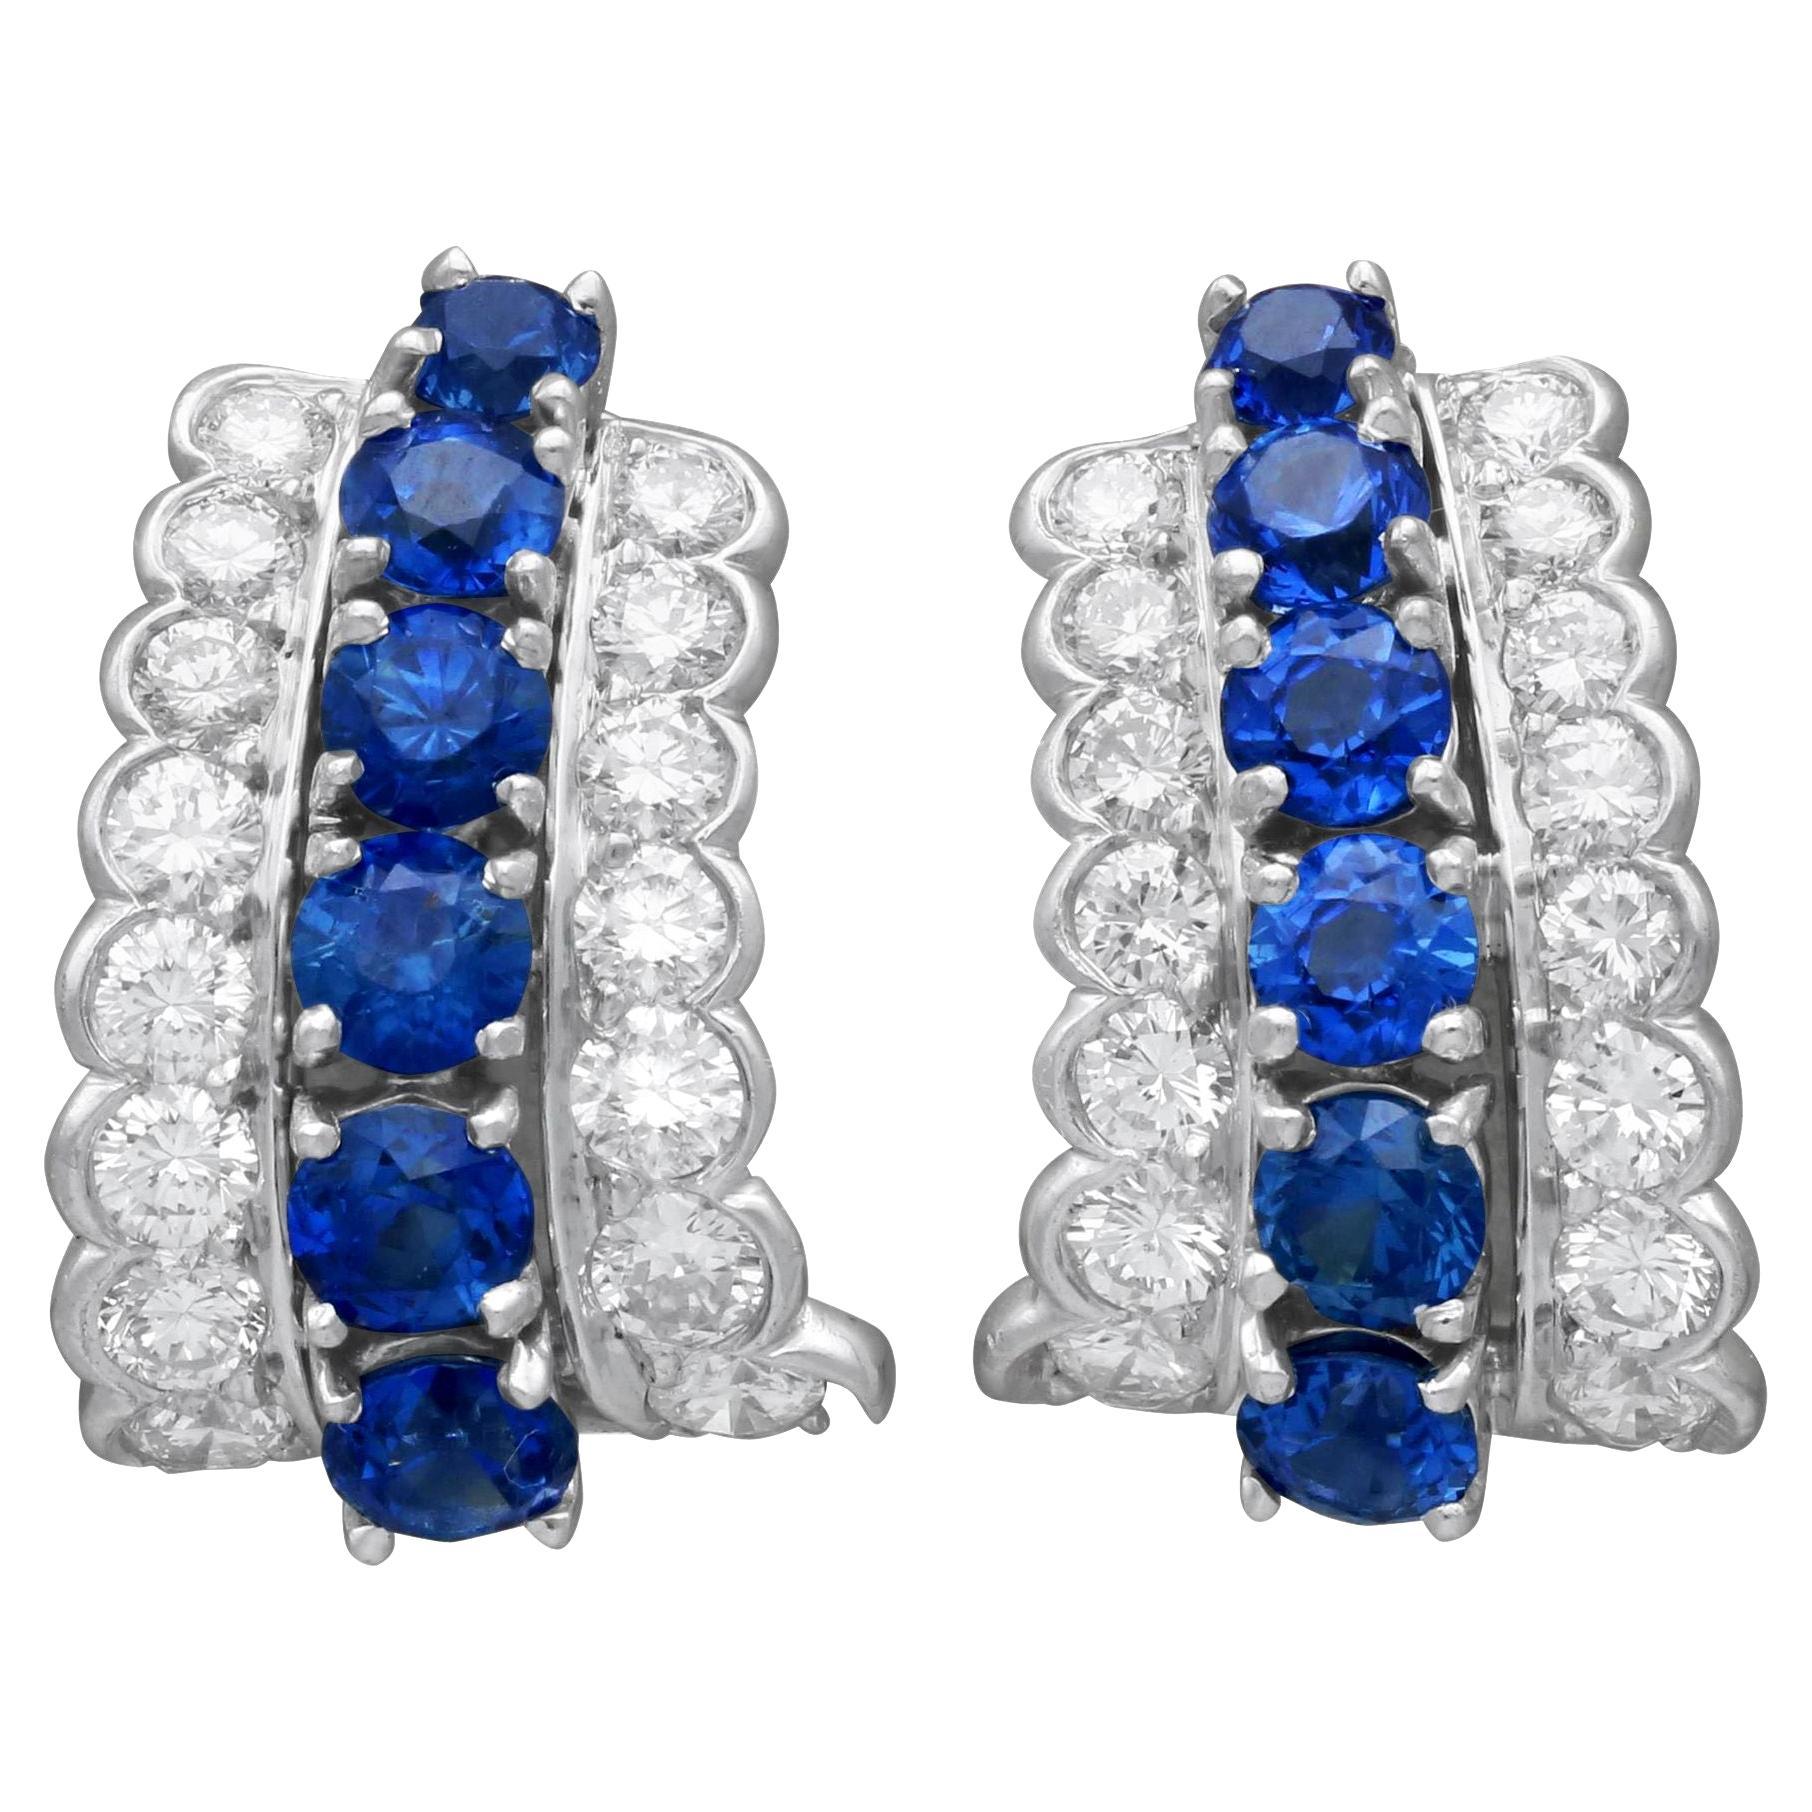 1.65 Carat Sapphire and 1.28 Carat Diamond Platinum Earrings by Tiffany & Co.